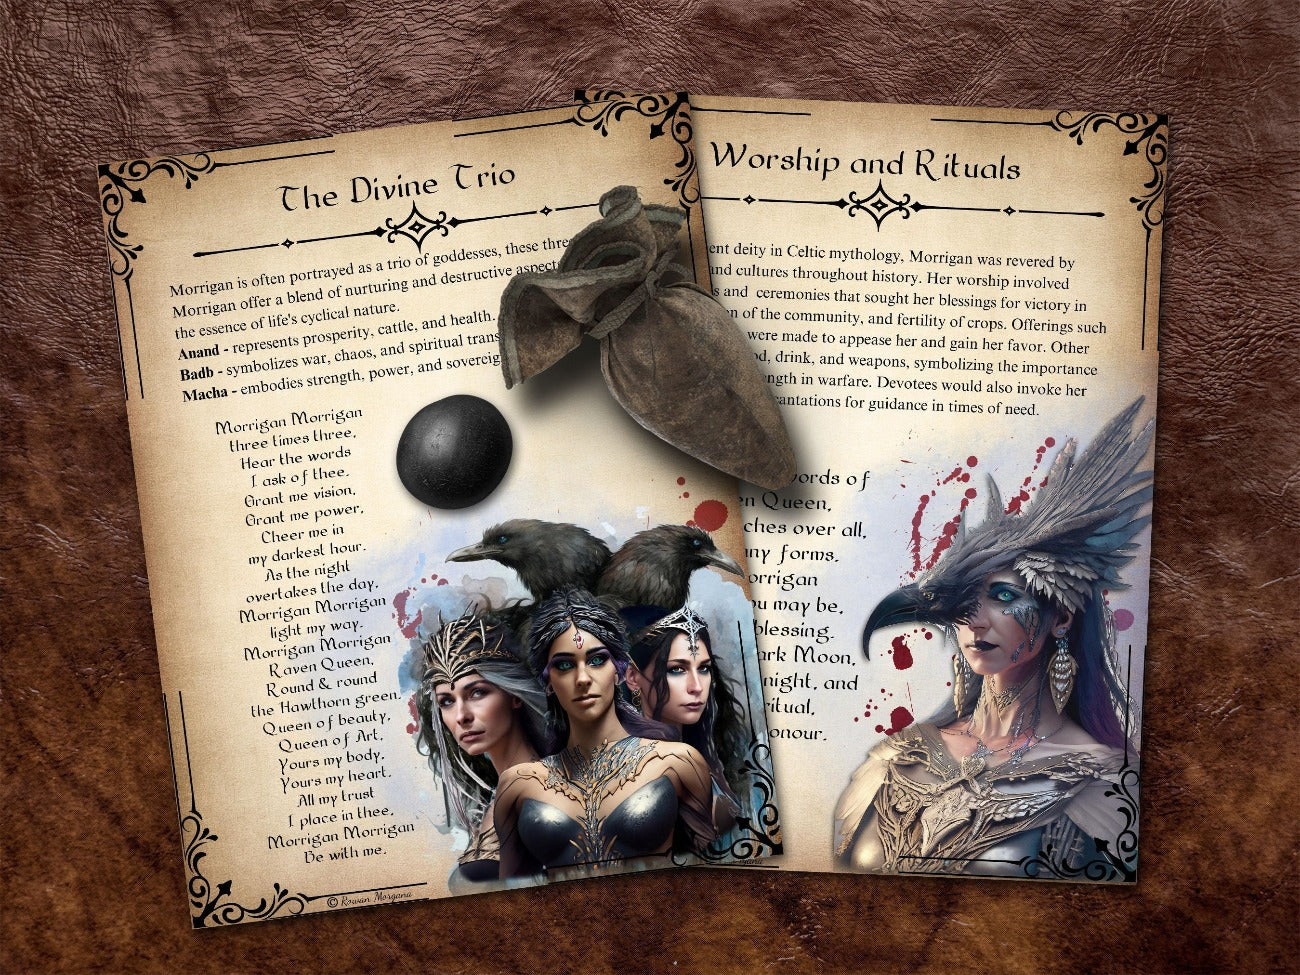 The Divine Trio and Morrigan Worship and Rituals, Printable Spell Book pages, Celtic Mythology Raven Diety, Wicca Dark Goddess Samhain Grimoire, Halloween Altar Prayers - Morgana Magick Spell